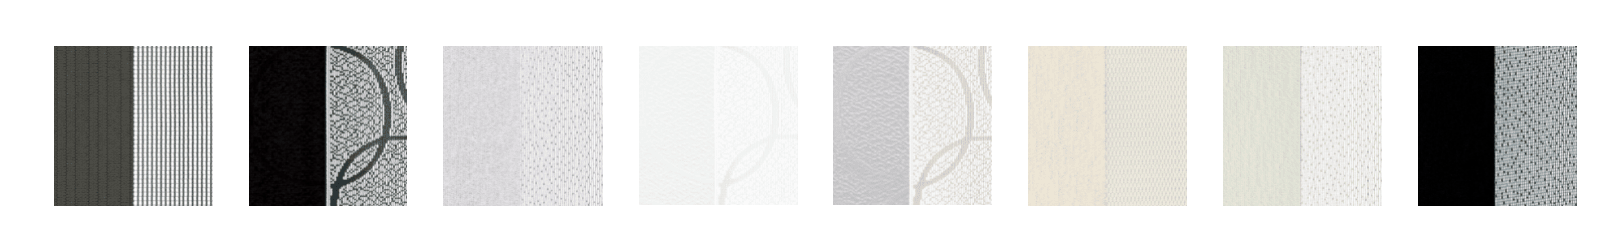 Norman SmartDrape color and pattern swatches